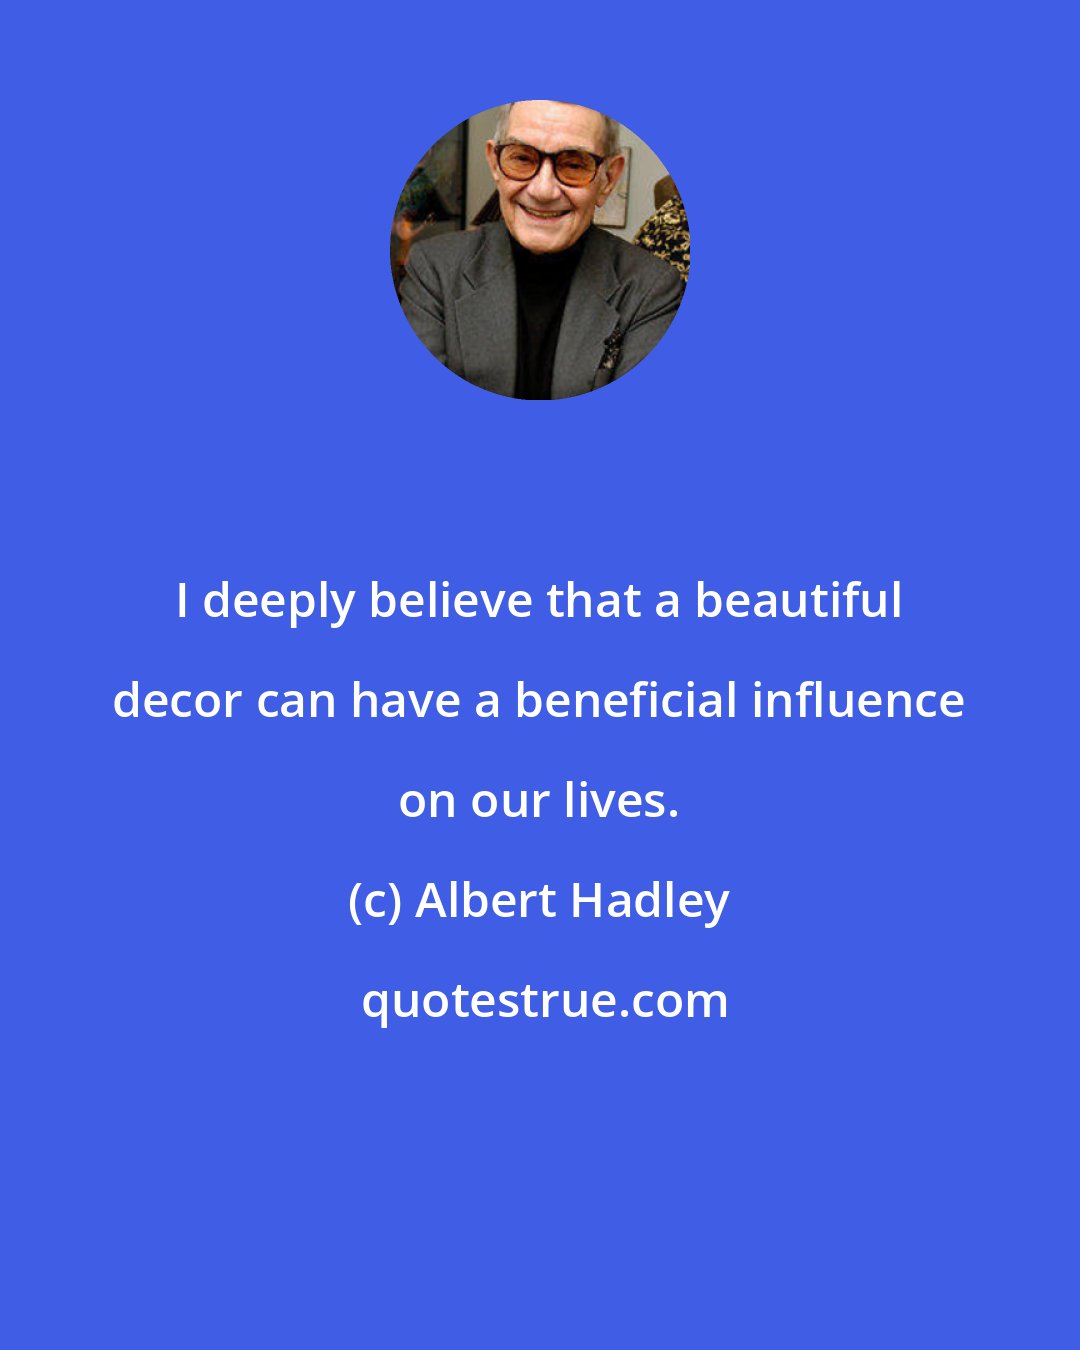 Albert Hadley: I deeply believe that a beautiful decor can have a beneficial influence on our lives.